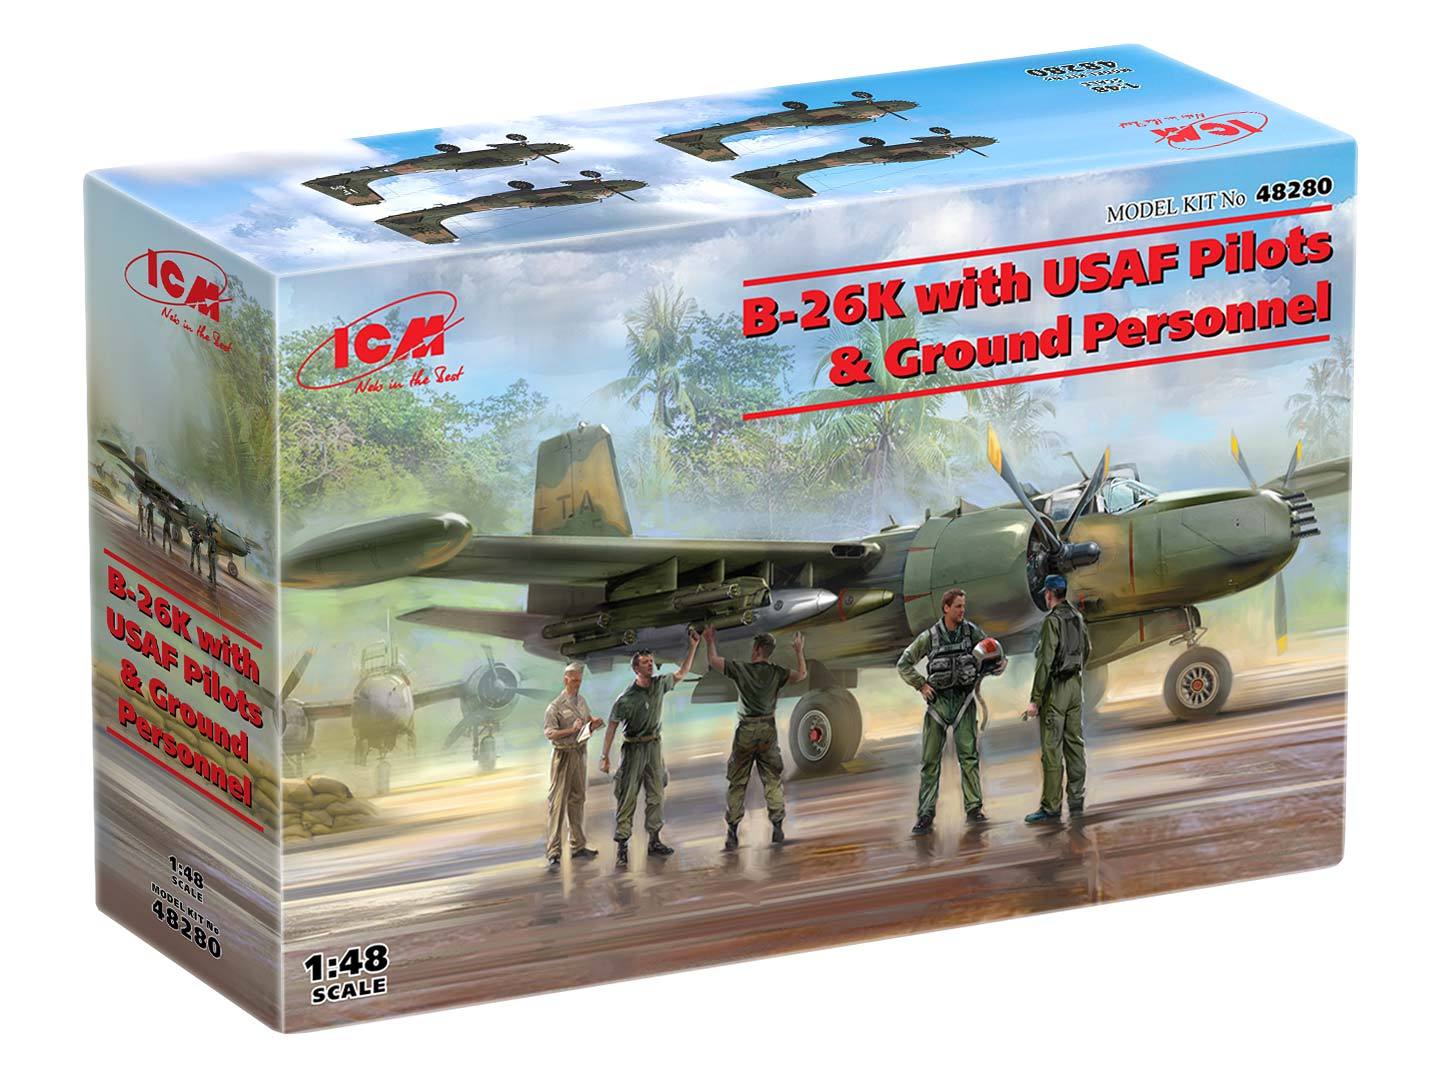 ICM 1:48 B-26K Counter Invader with USAFPilots and Ground Support